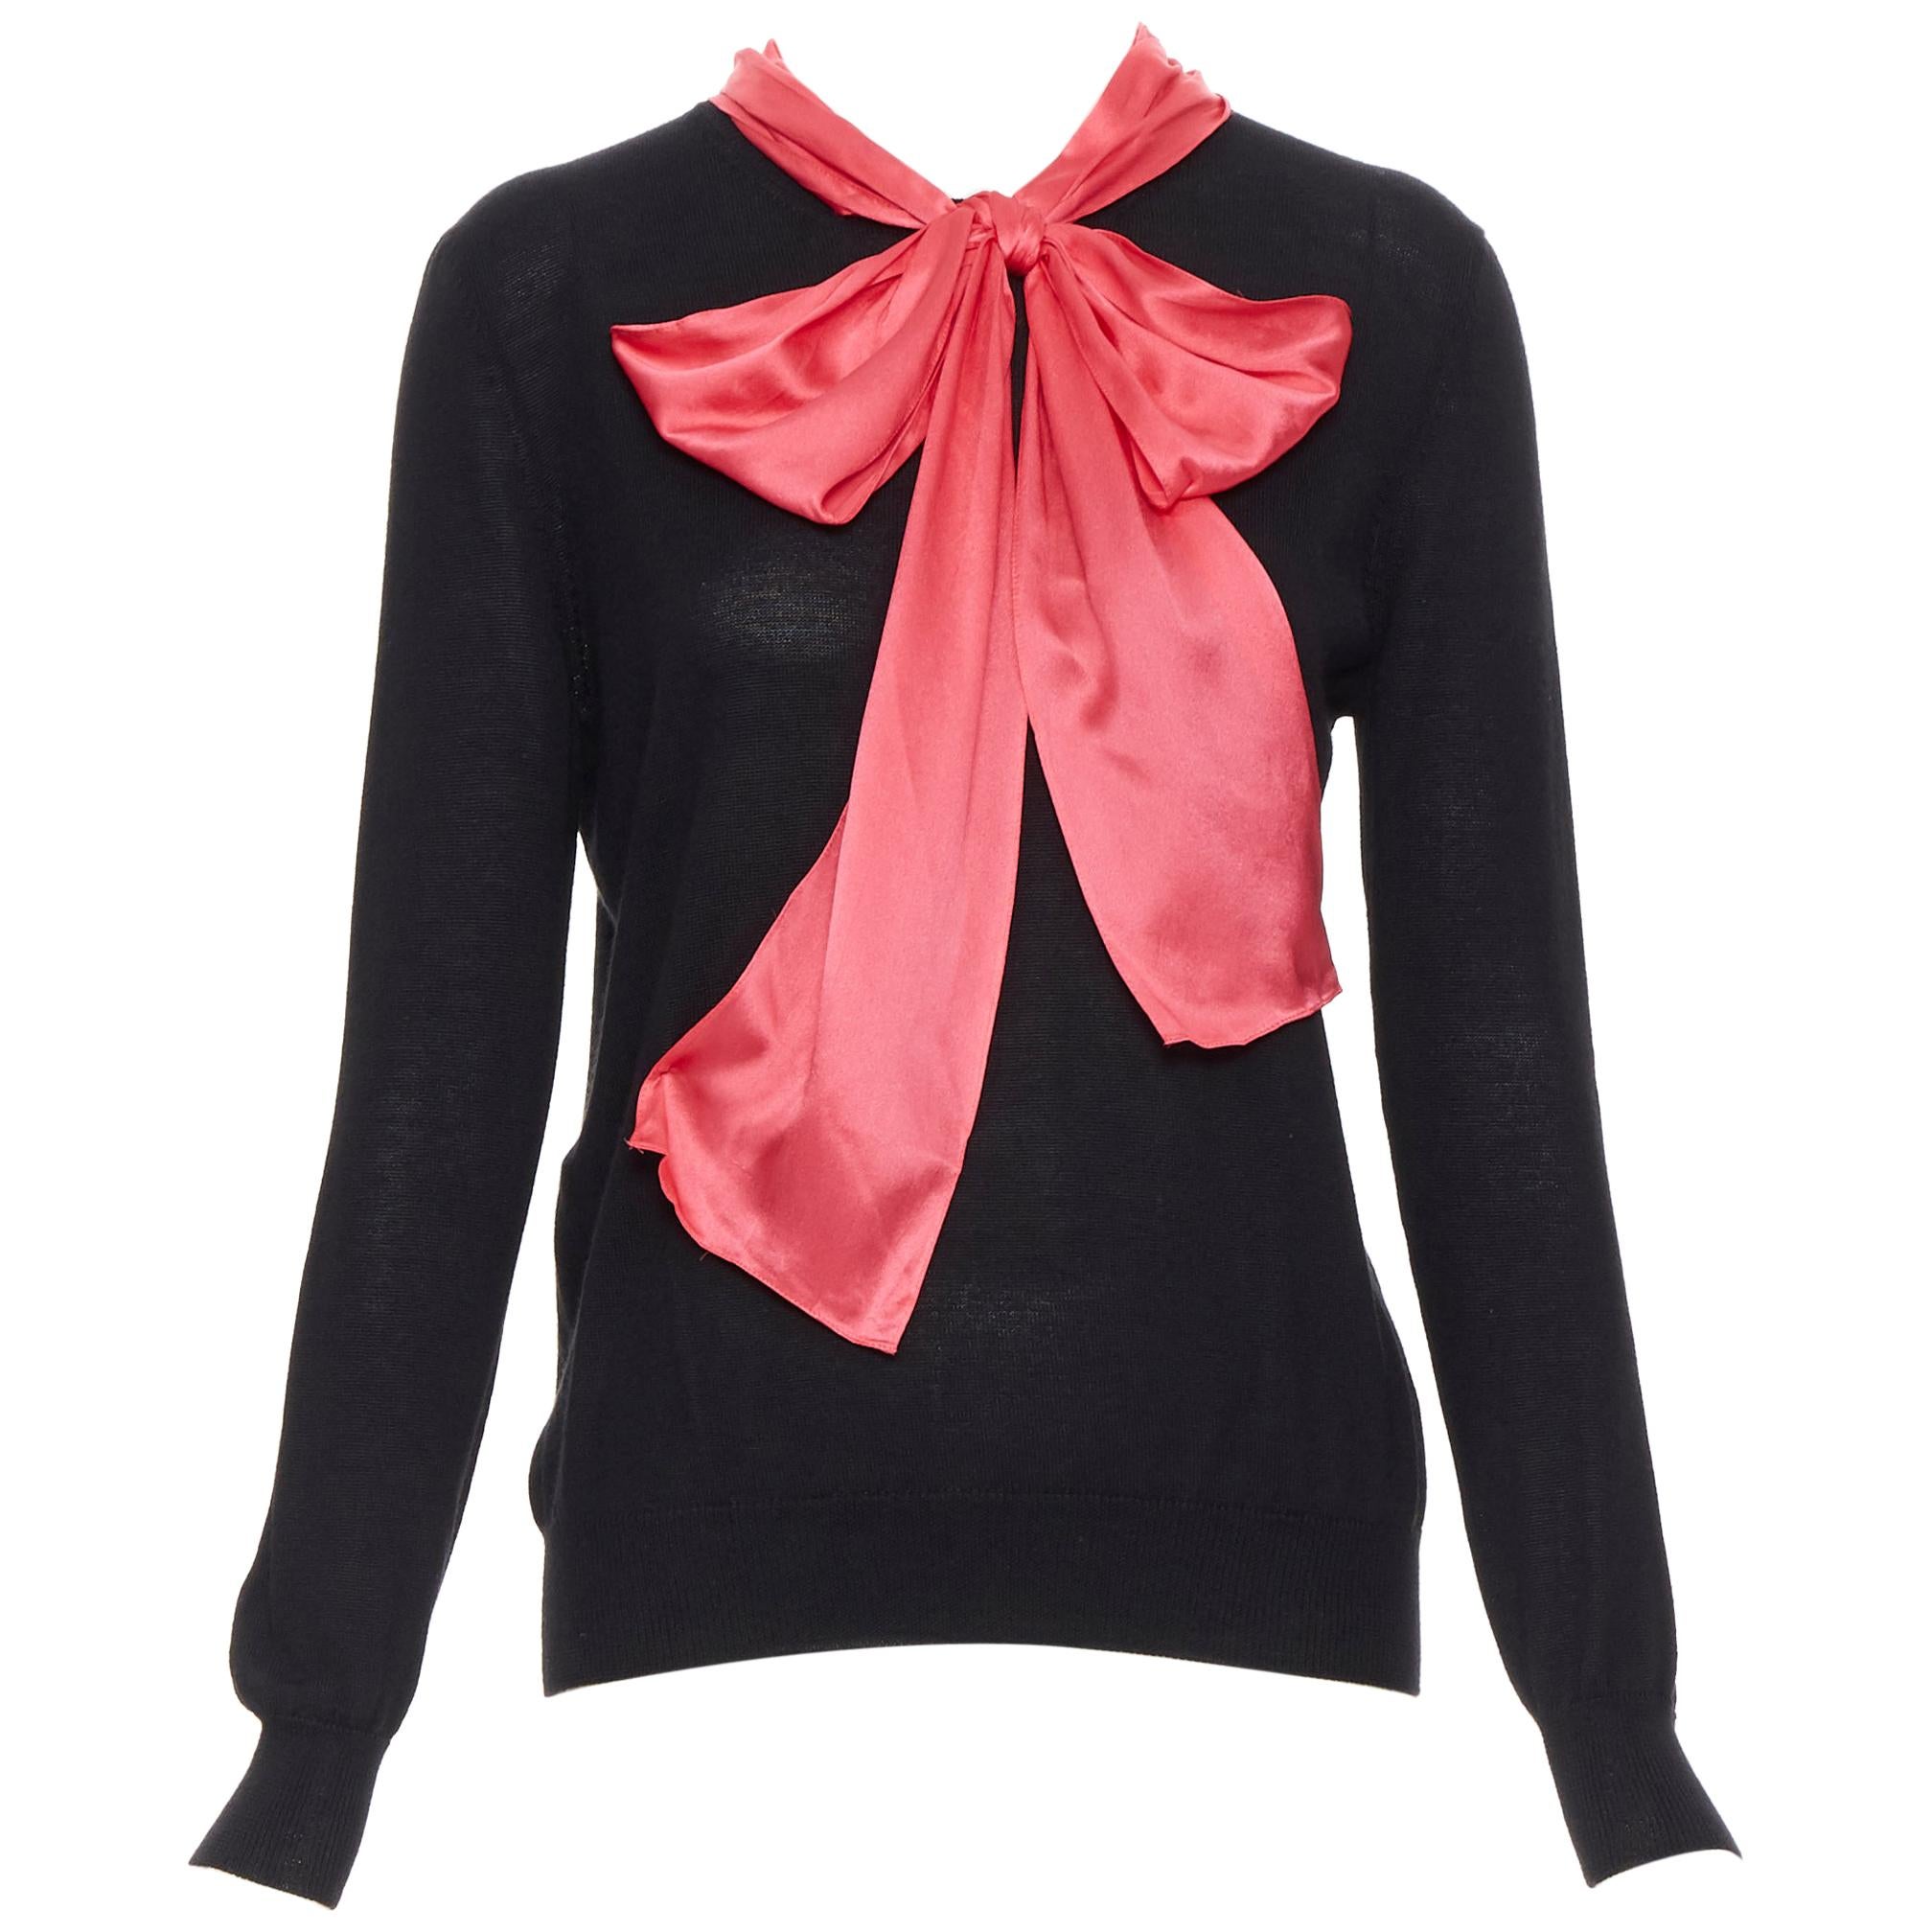 GUCCI MICHELE black cashmere blend knit pink silk pussy bow sweater top L